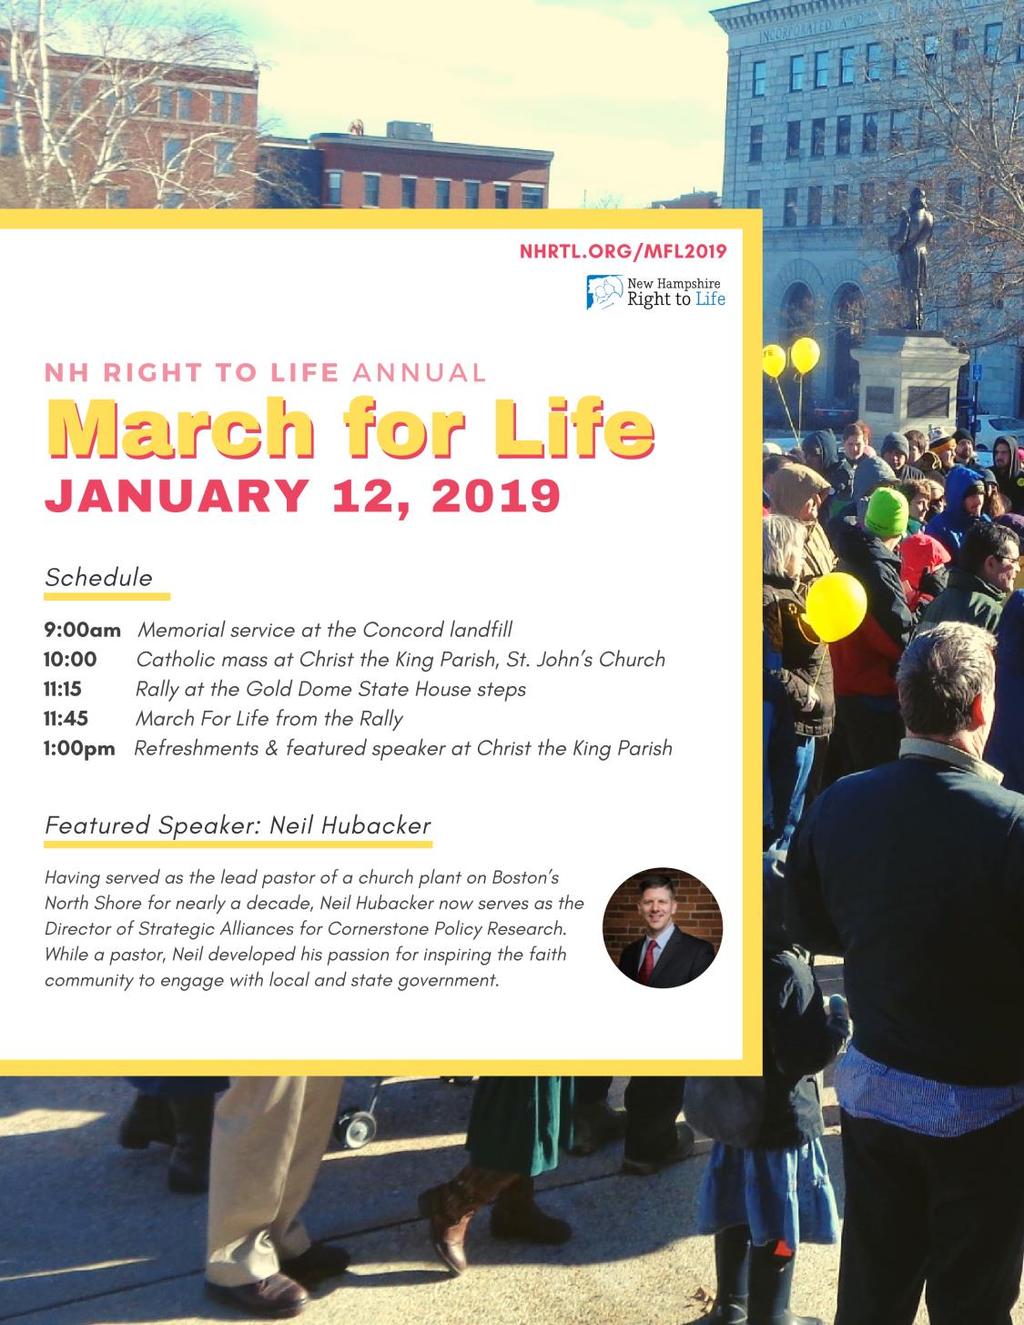 Worthy Sirs: Please note that The March for Life in Concord is set for Saturday January 12th. We'll start off with the Right to Life Mass at 10 a.m. at St. John's church on Main St.